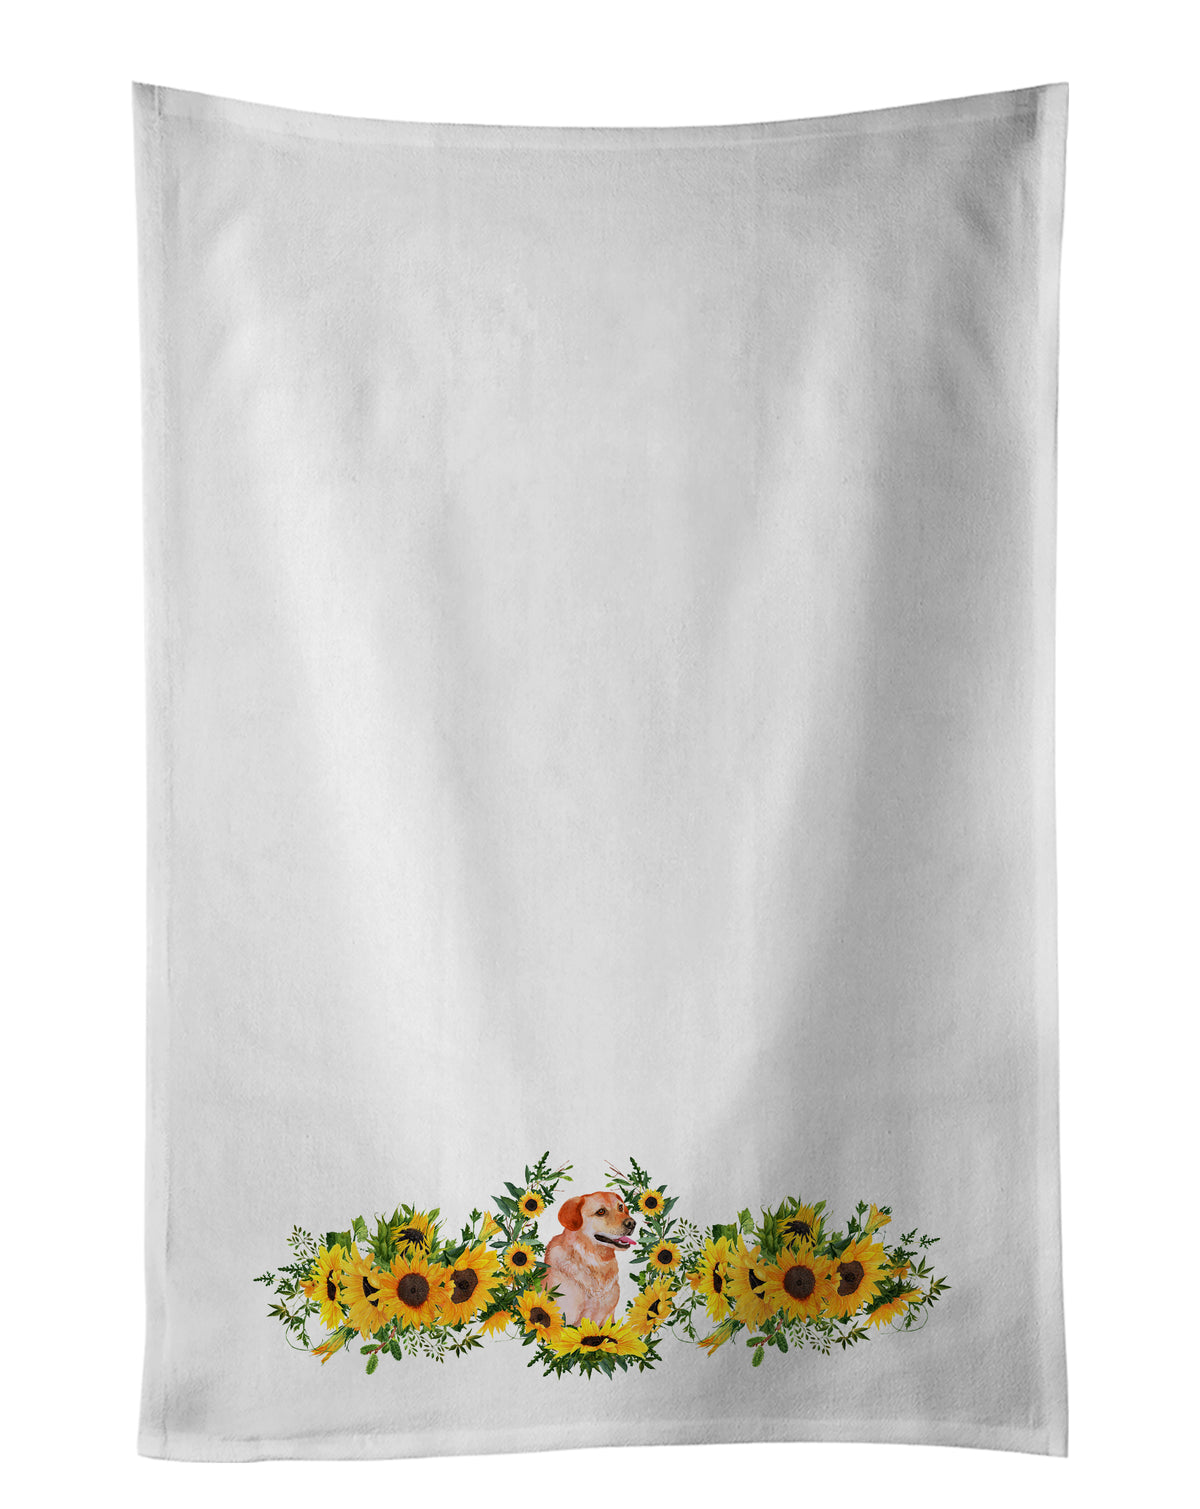 Buy this Labrador Retriever in Sunflowers White Kitchen Towel Set of 2